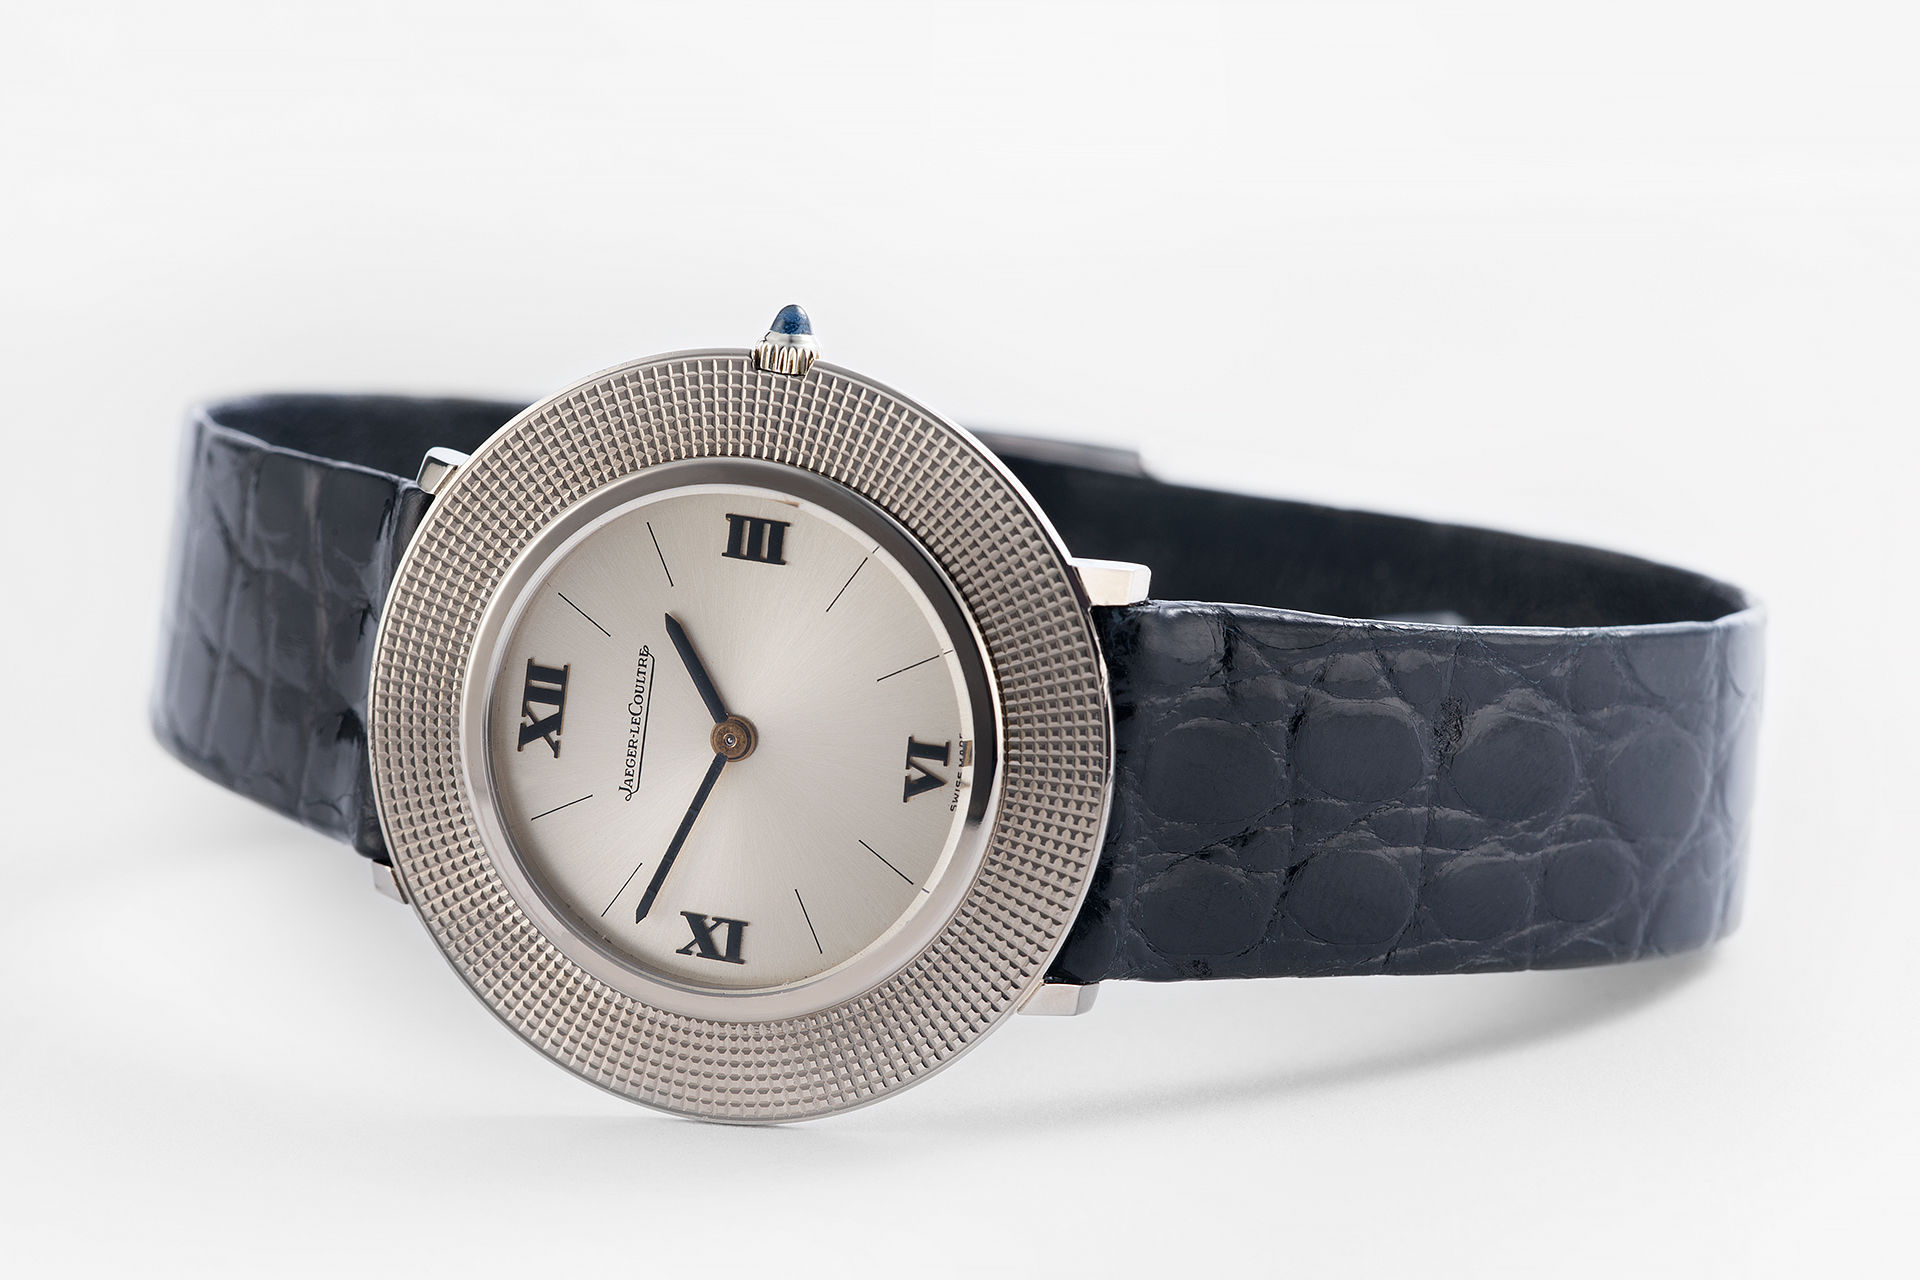 ref 4432 | White Gold Dress watch | Jaeger-leCoultre Vintage Gent's Watch